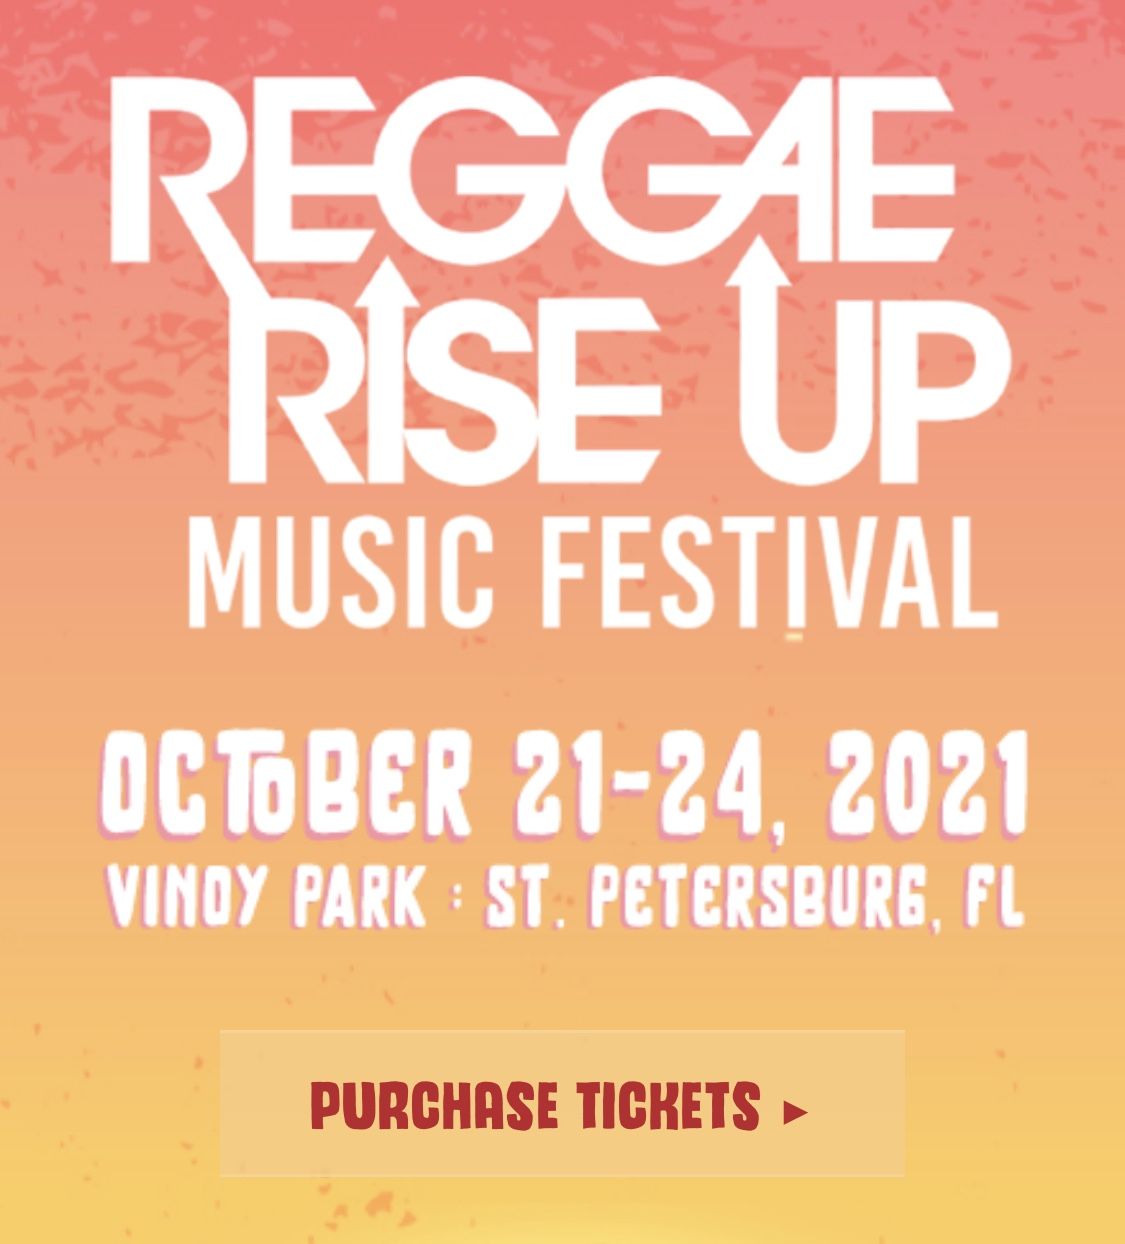 2x Reggae Rise Up Tickets for FRIDAY ONLY